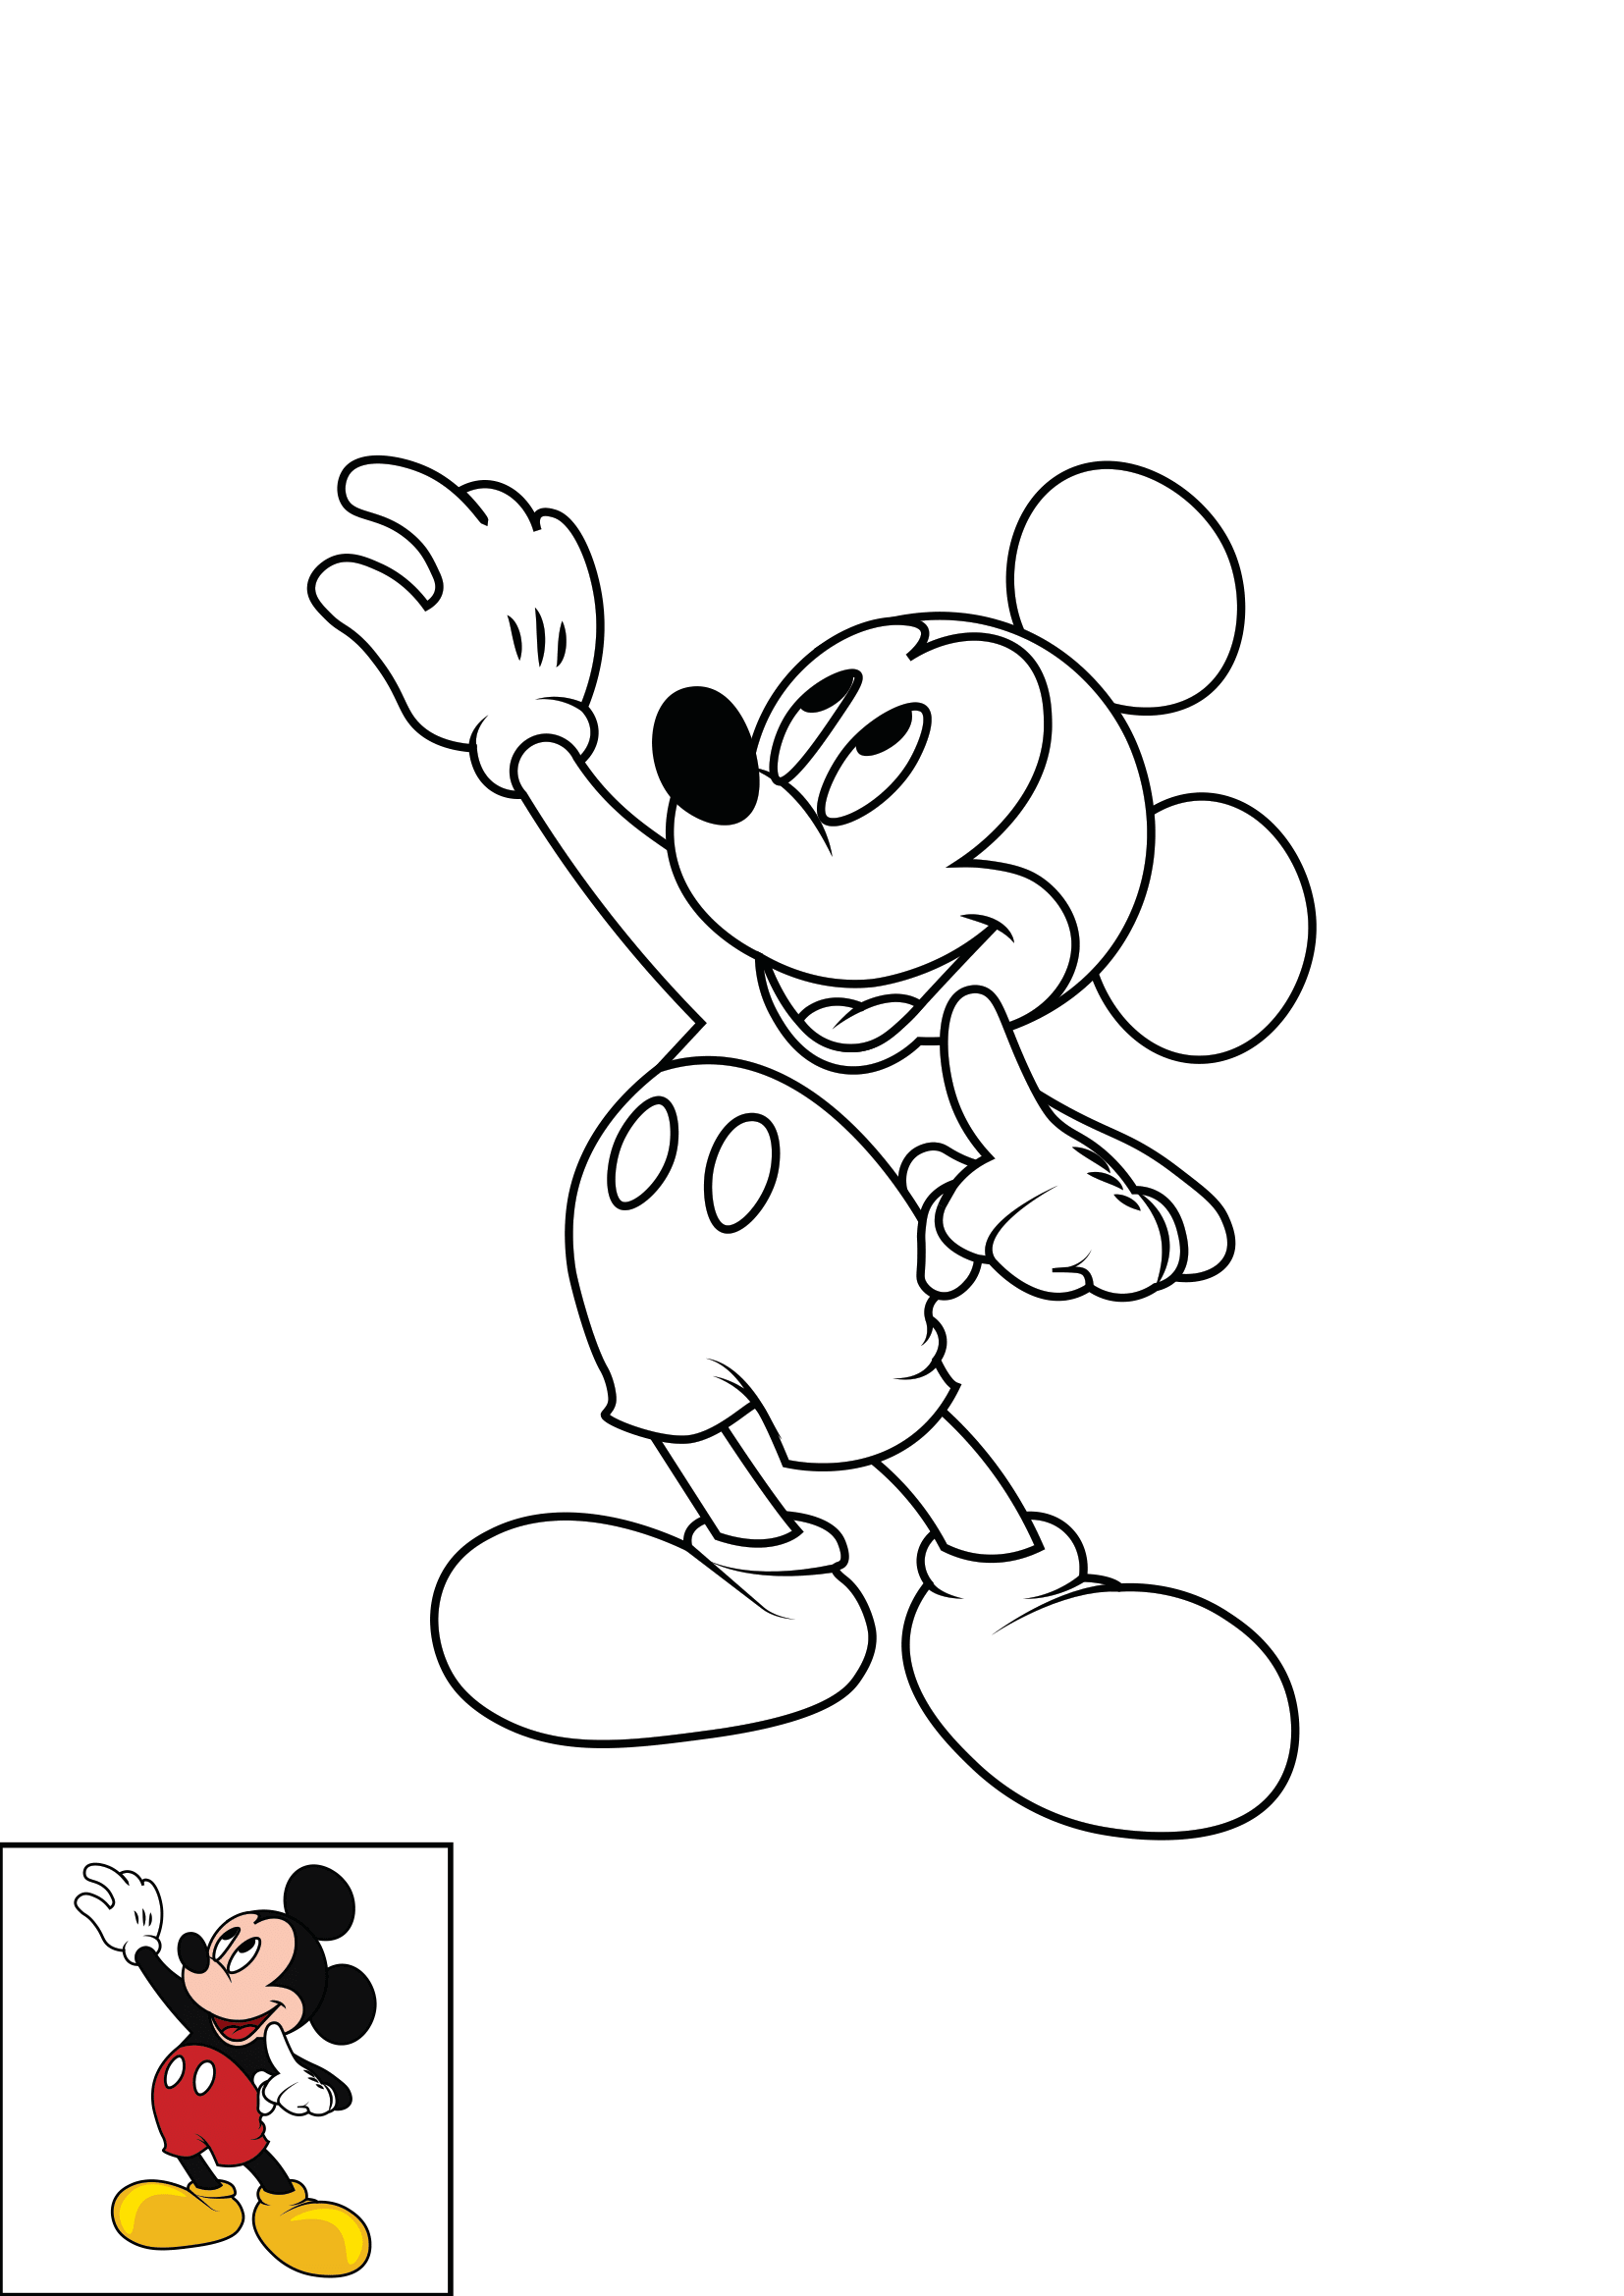 How to Draw Mickey Mouse Step by Step Printable Color